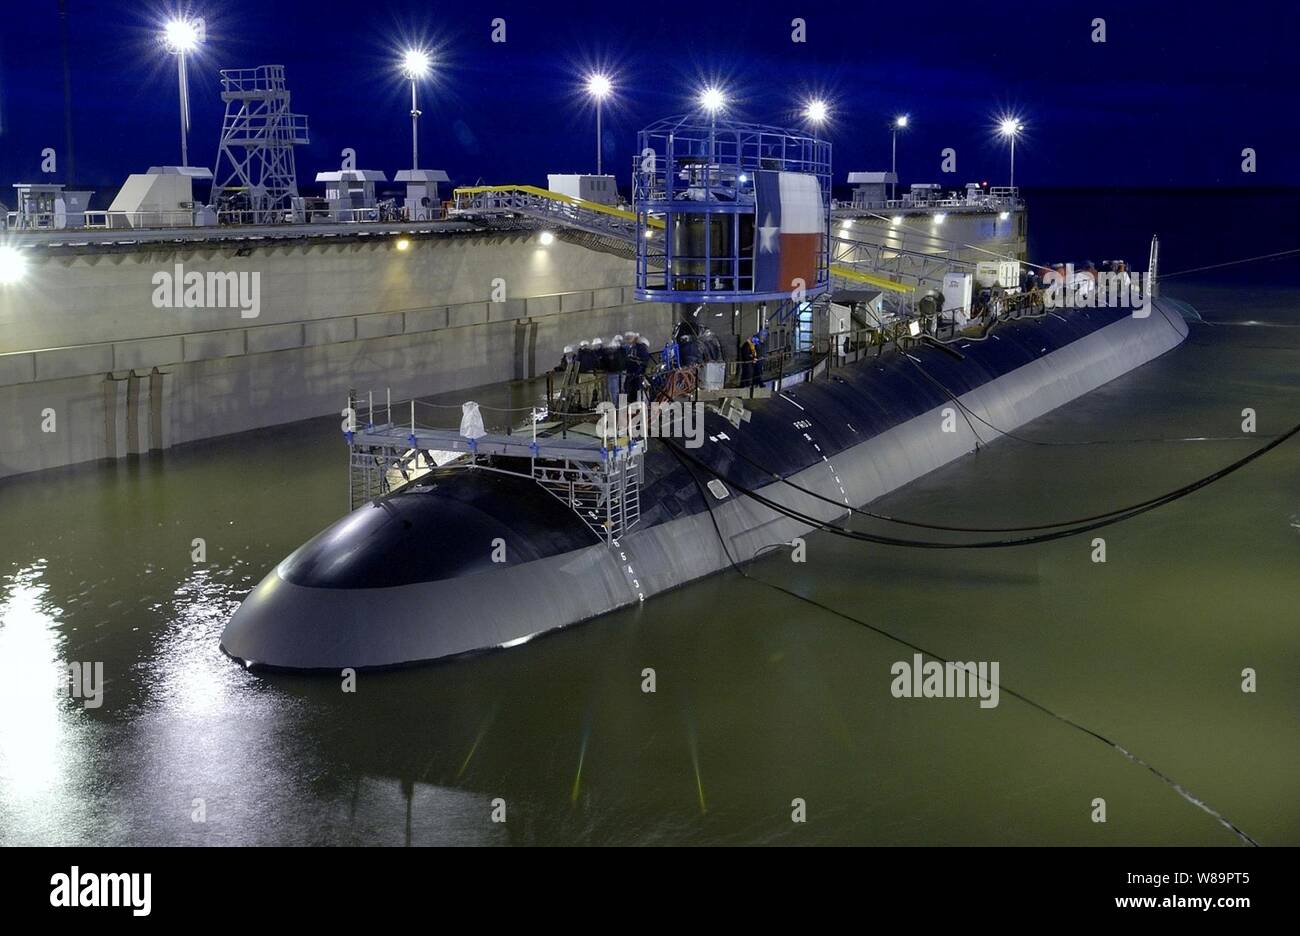 The floating dry dock at Northrop Grumman Corporation in Newport News, Va., slowly fills up with water in order to launch the Virginia-class attack submarine Texas (SSN 775) on April 9, 2005.  Tugboats will later move the submarine to the shipyard's submarine pier for fitting out.  Texas will have improved stealth capabilities, sophisticated surveillance capabilities, and Special Warfare enhancements that will enable it to meet the Navy's multi-mission requirements. Stock Photo